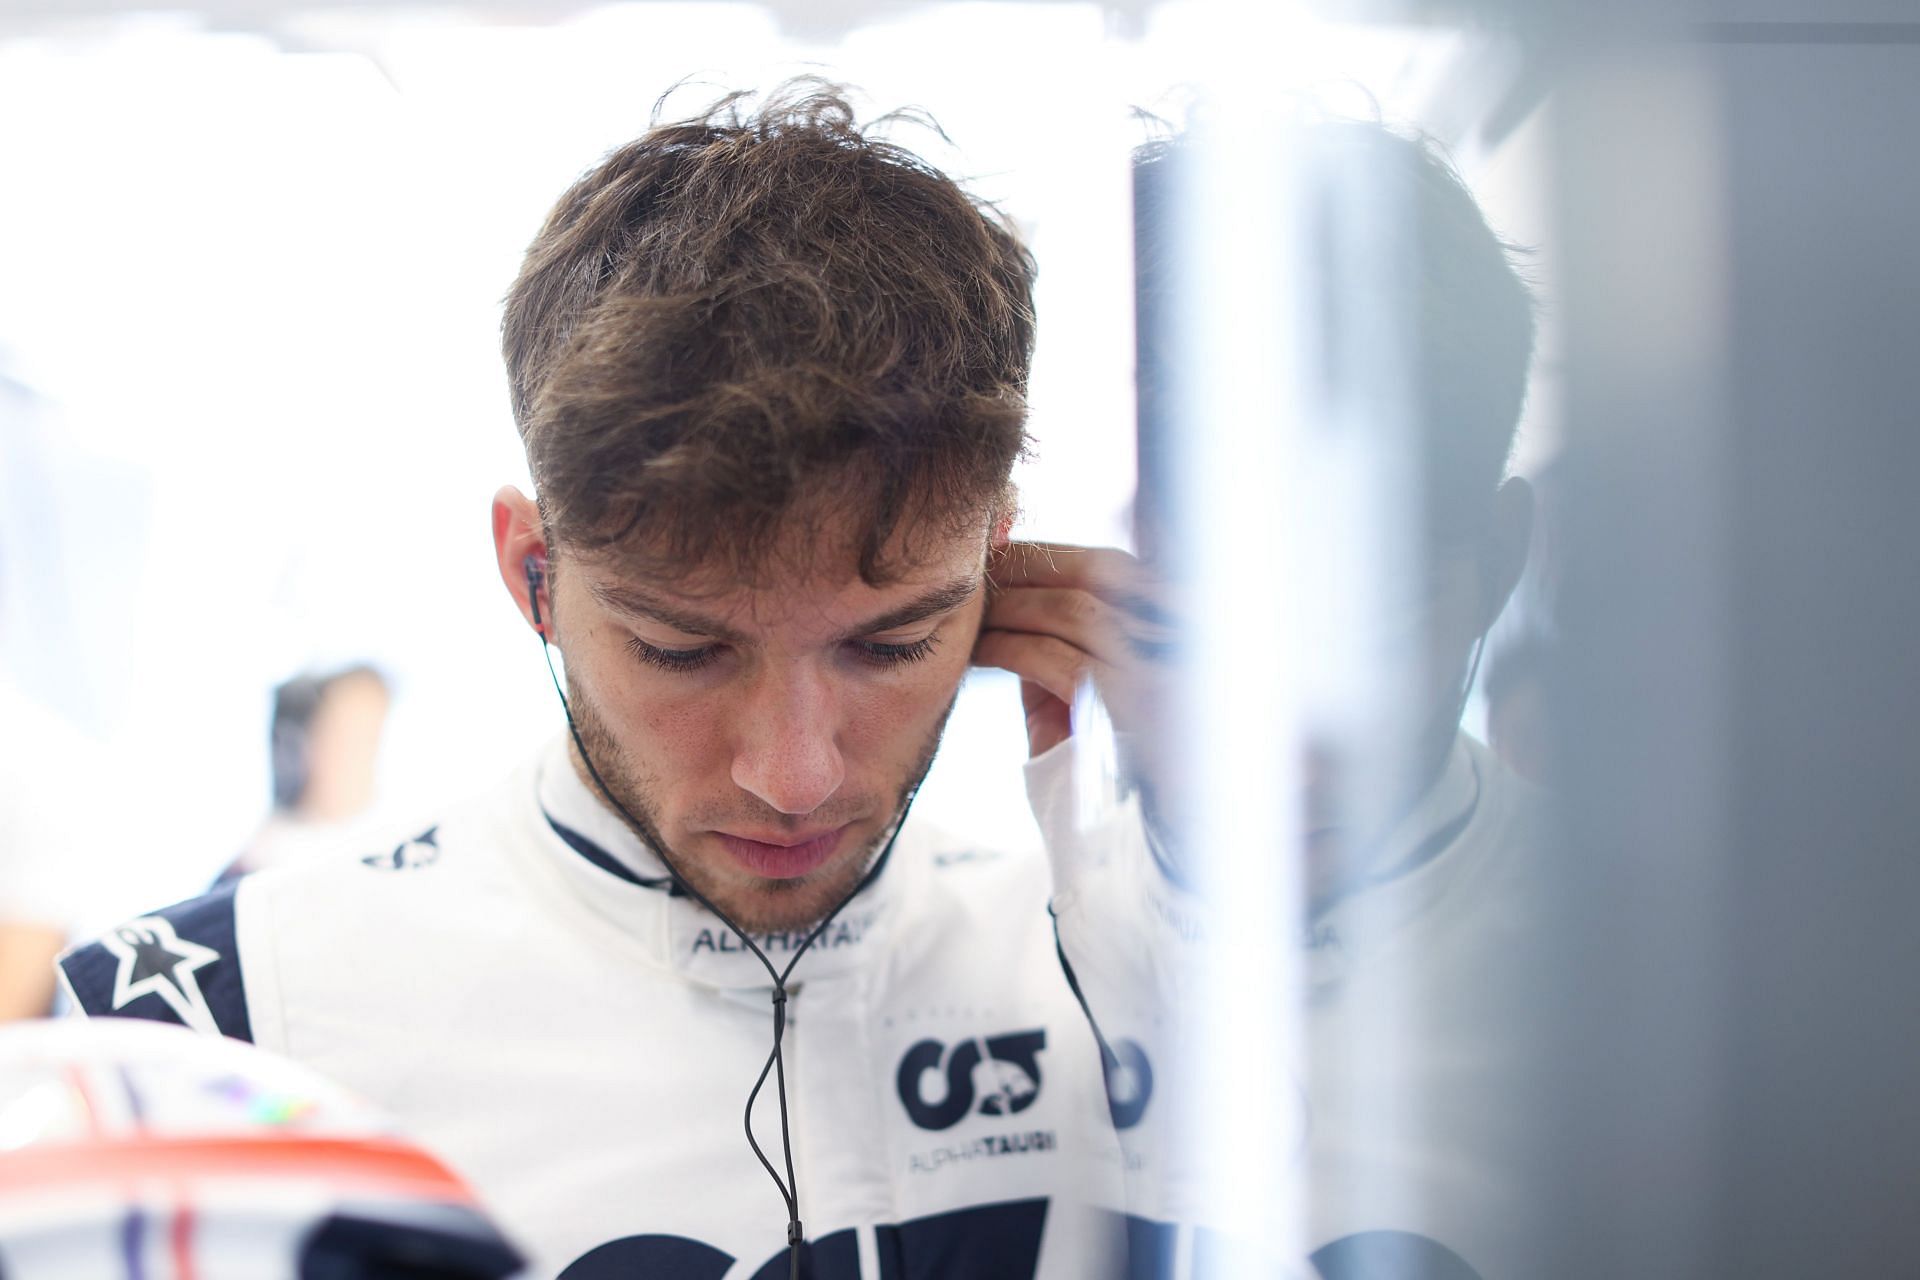 Pierre Gasly prepares to drive in the garage during practice ahead of the F1 Grand Prix of Hungary at Hungaroring on July 29, 2022, in Budapest, Hungary (Photo by Peter Fox/Getty Images)